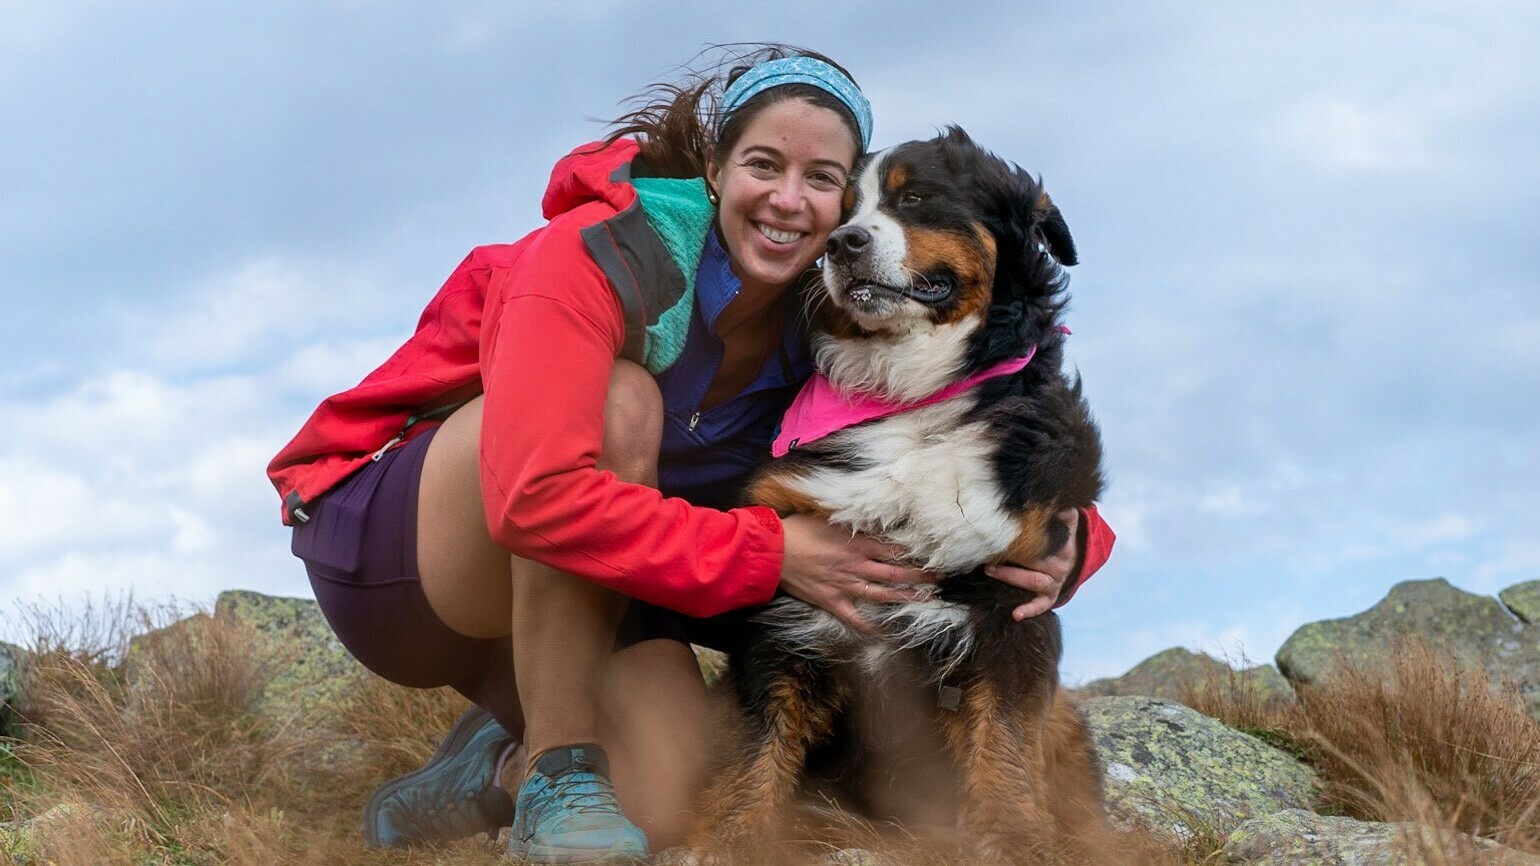 Kate Speer, on a hike with her service dog, Waffle. Her popular social media accounts feature frank discussion of mental